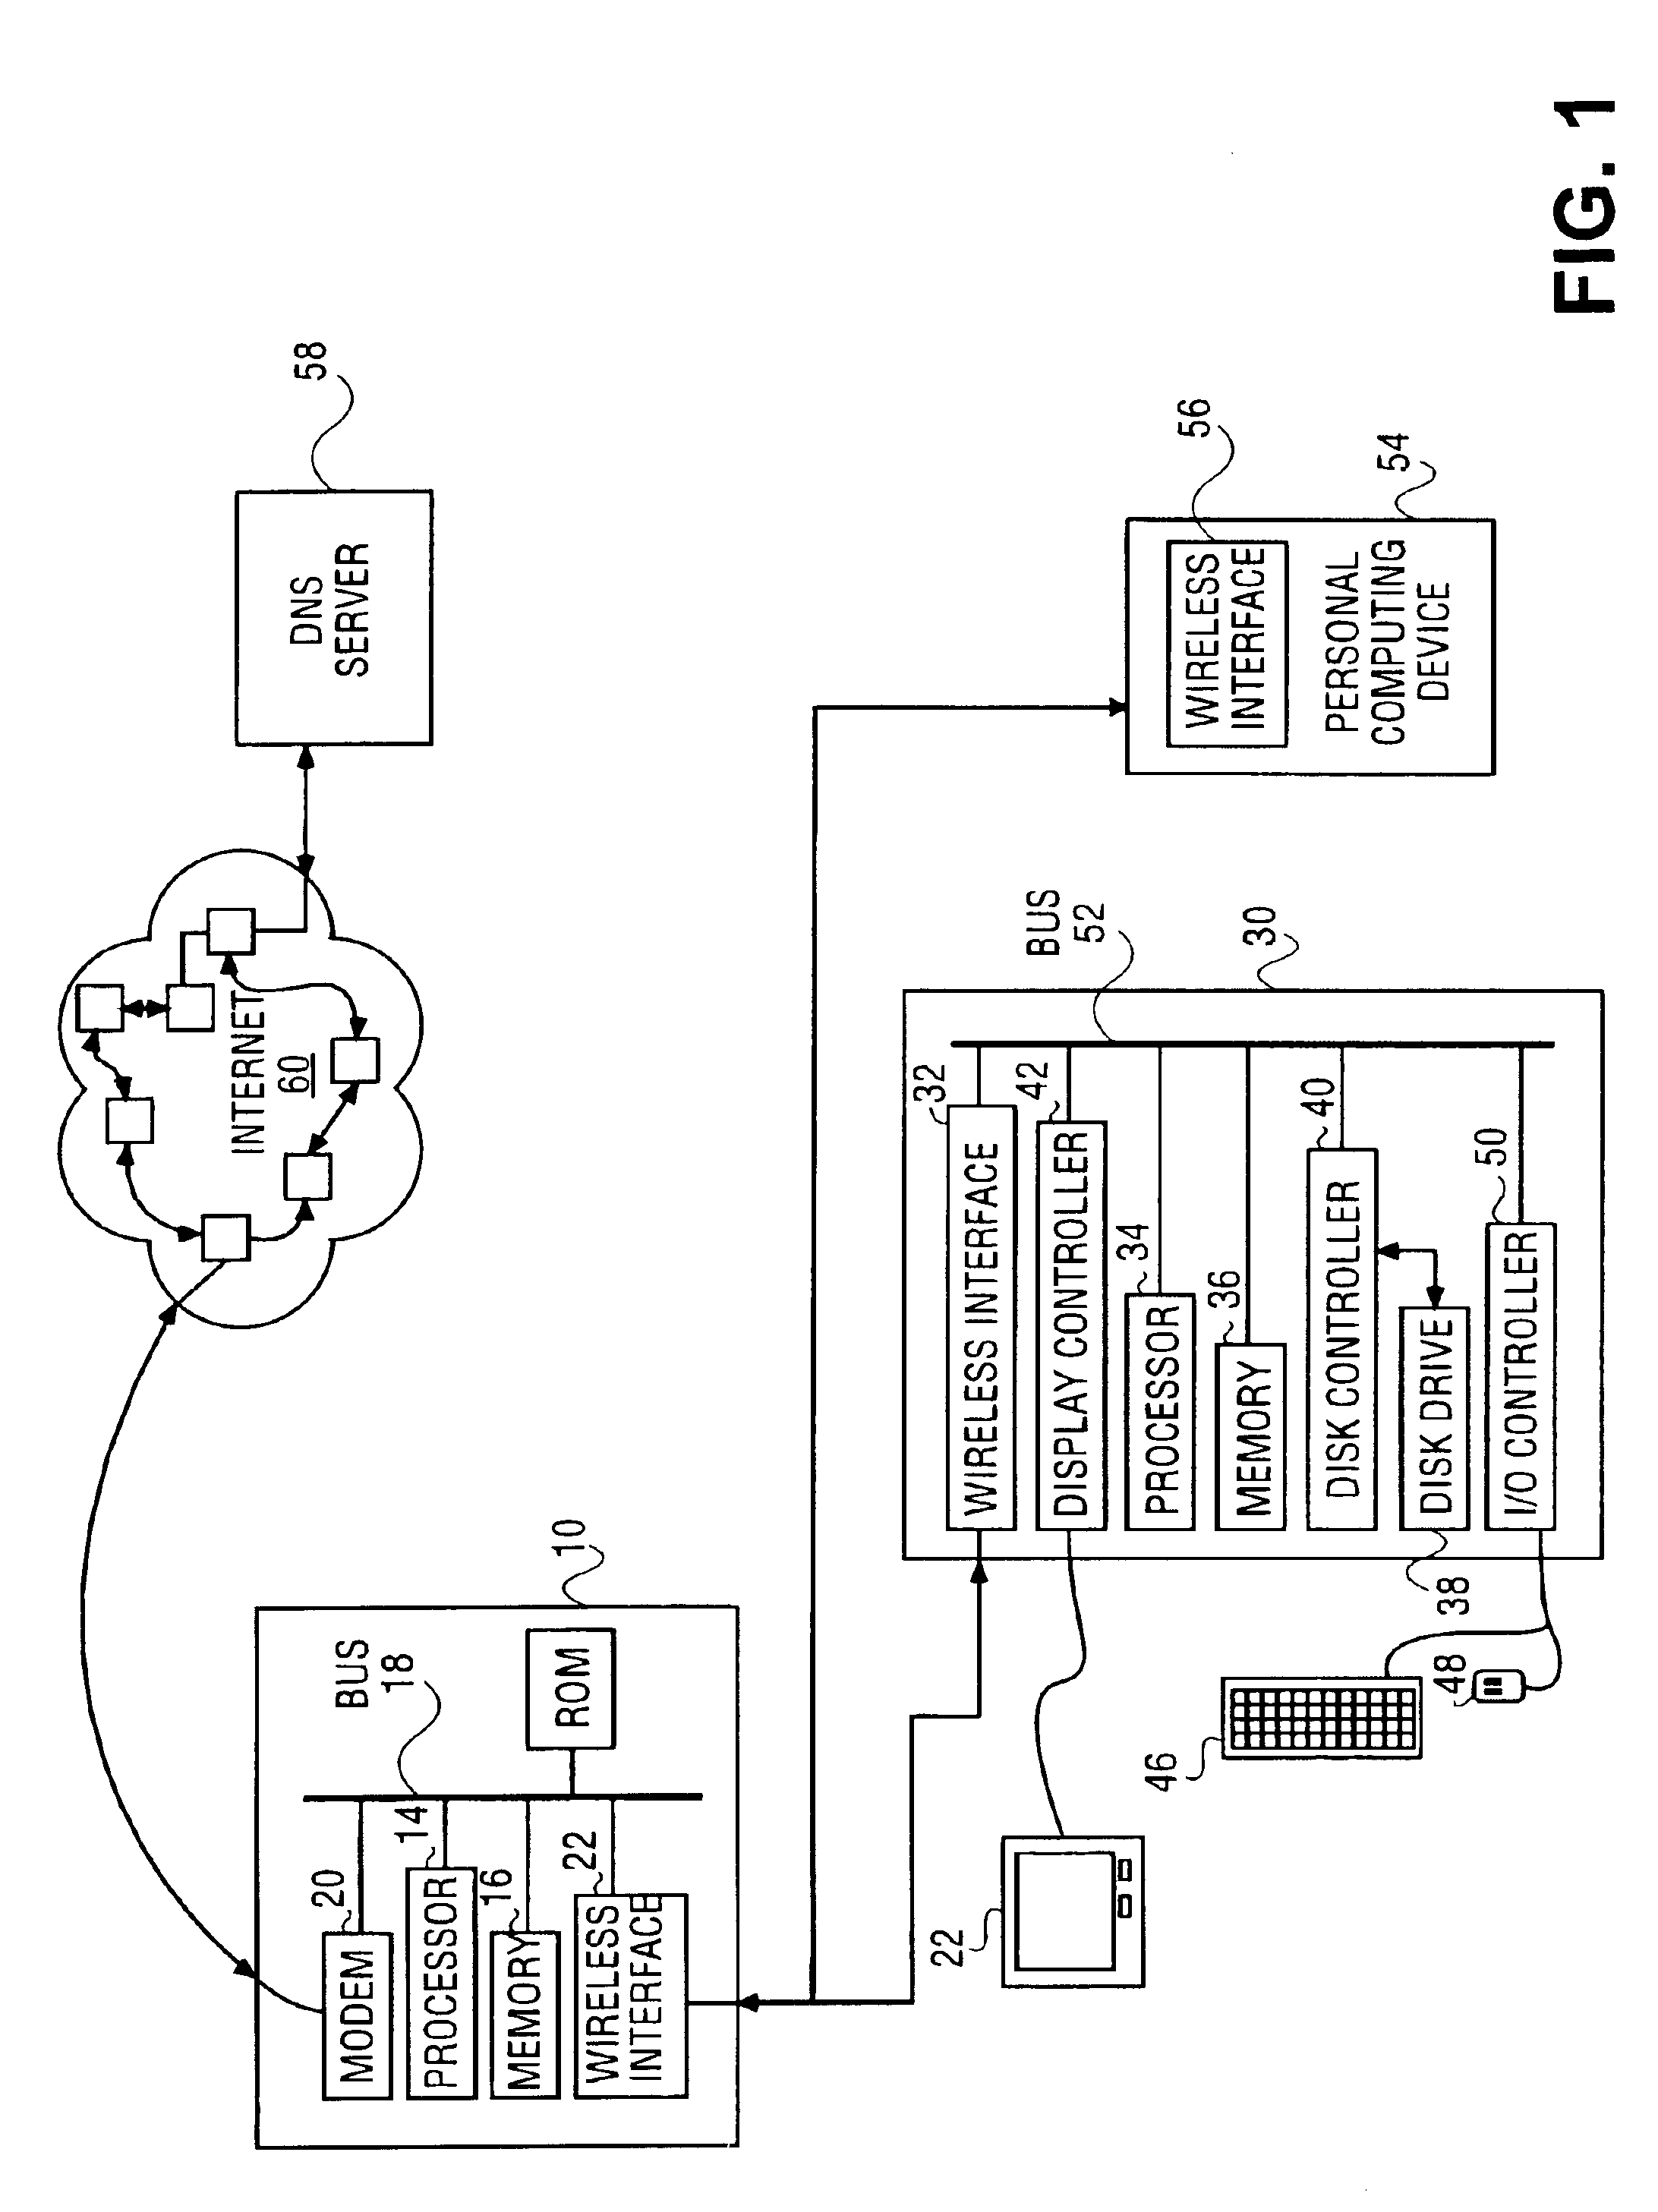 Method and system for preventing a timeout from reaching a network host